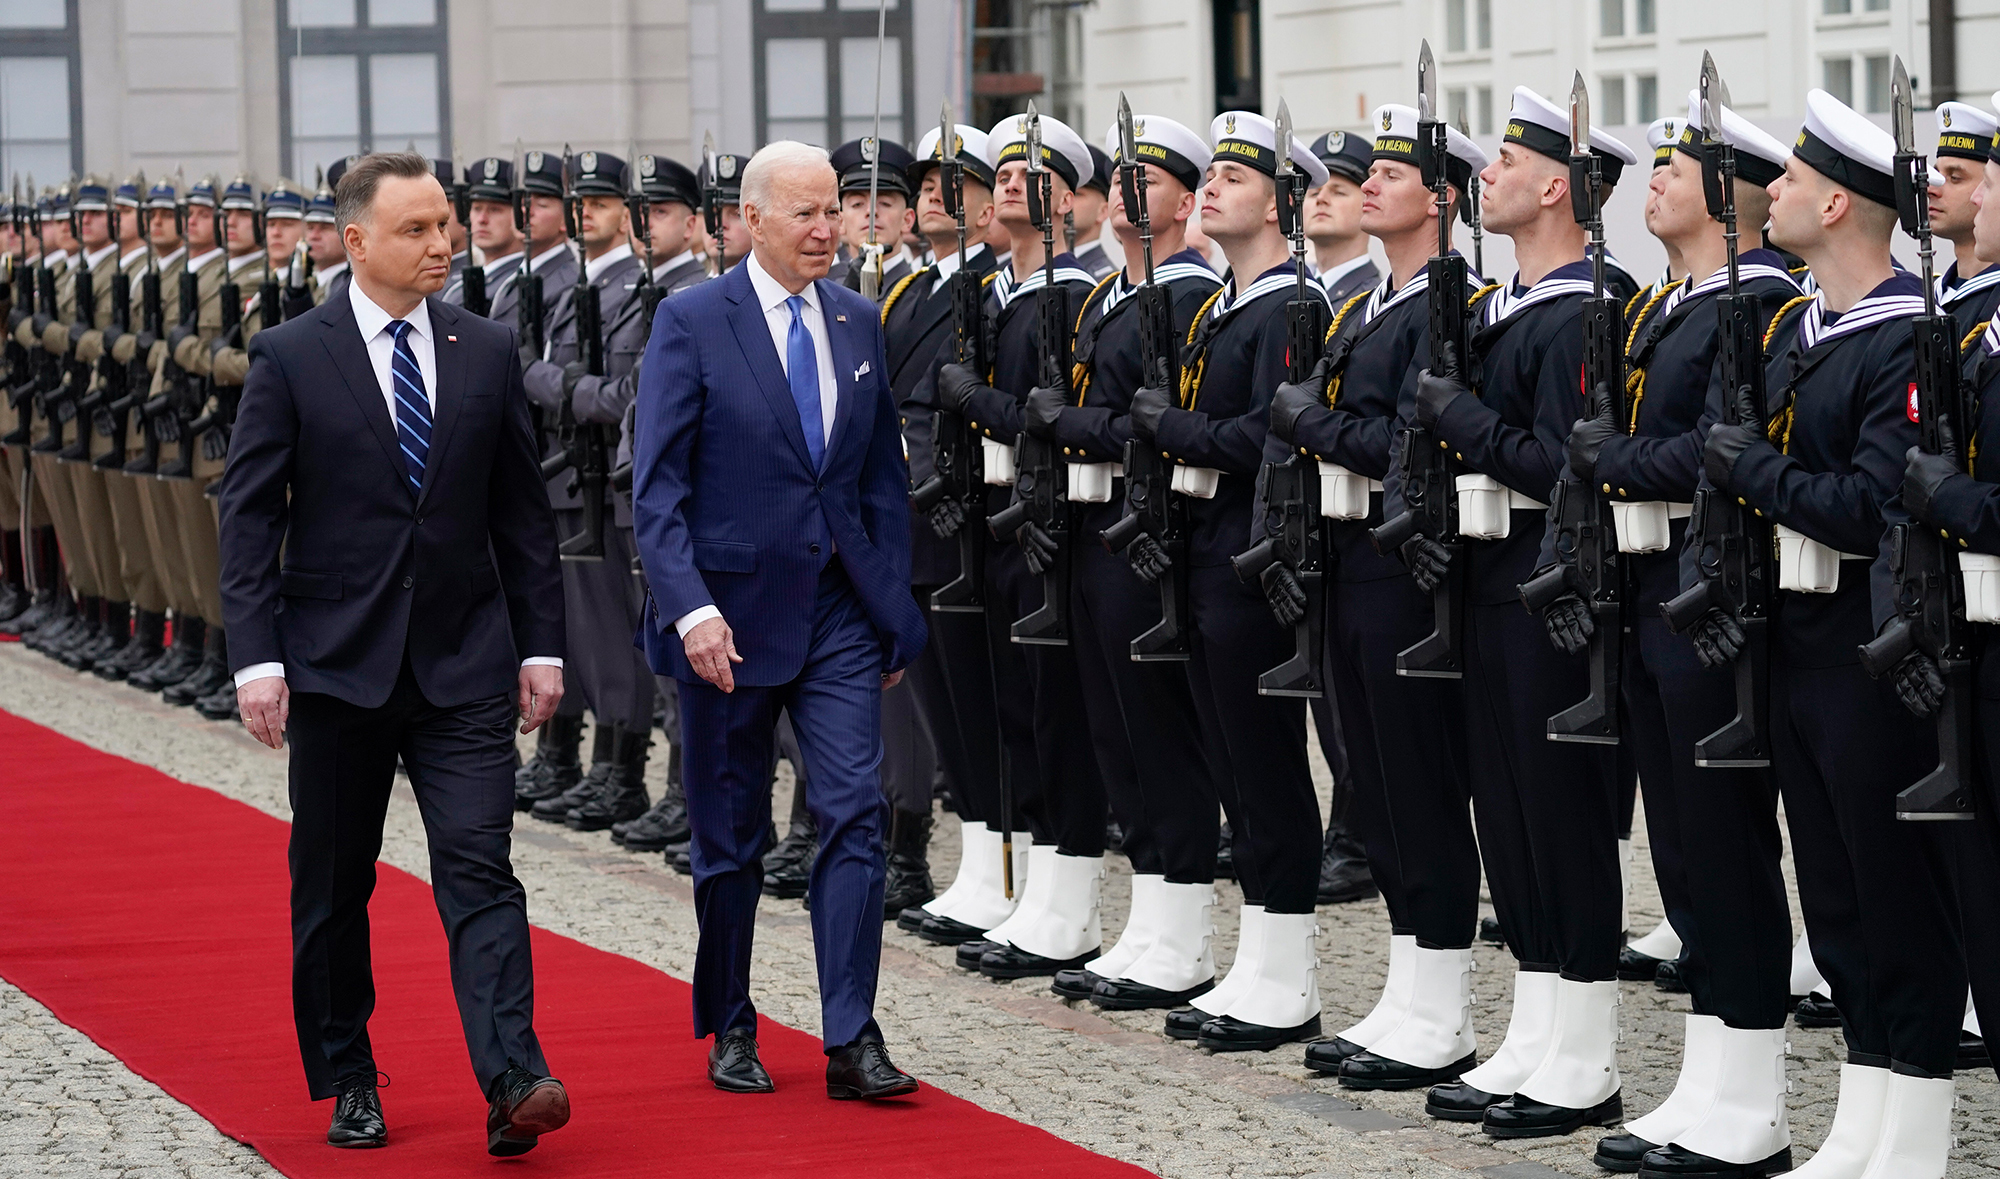 US President Joe Biden participates in a welcome ceremony for Polish President Andrzej Duda on March 26 in Warsaw, Poland. 